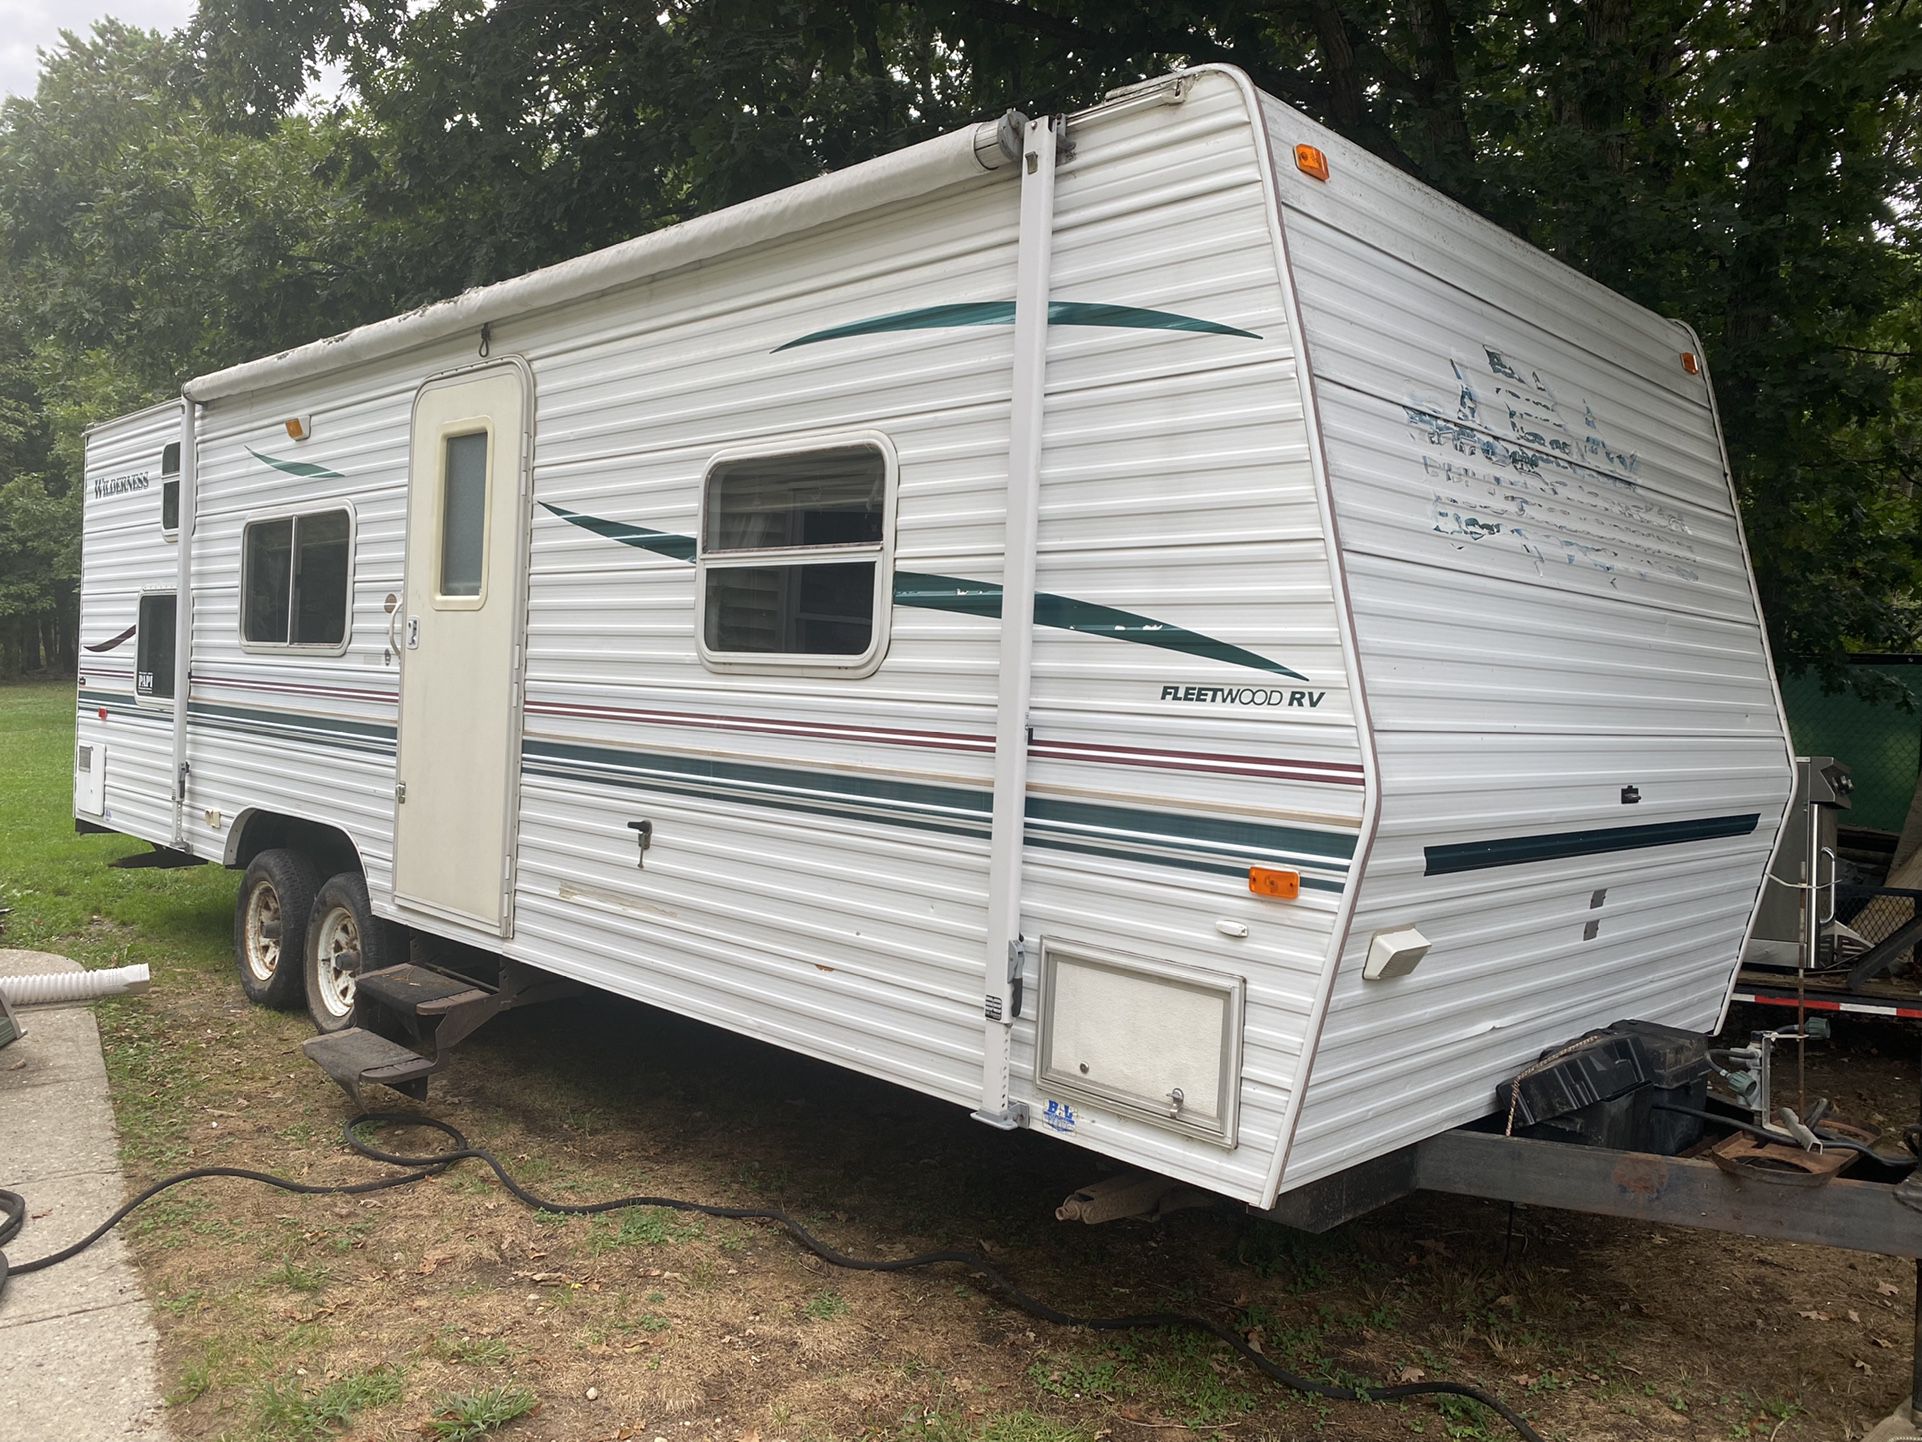 2001 Fleetwood Wilderness for Sale in Manorville, NY - OfferUp